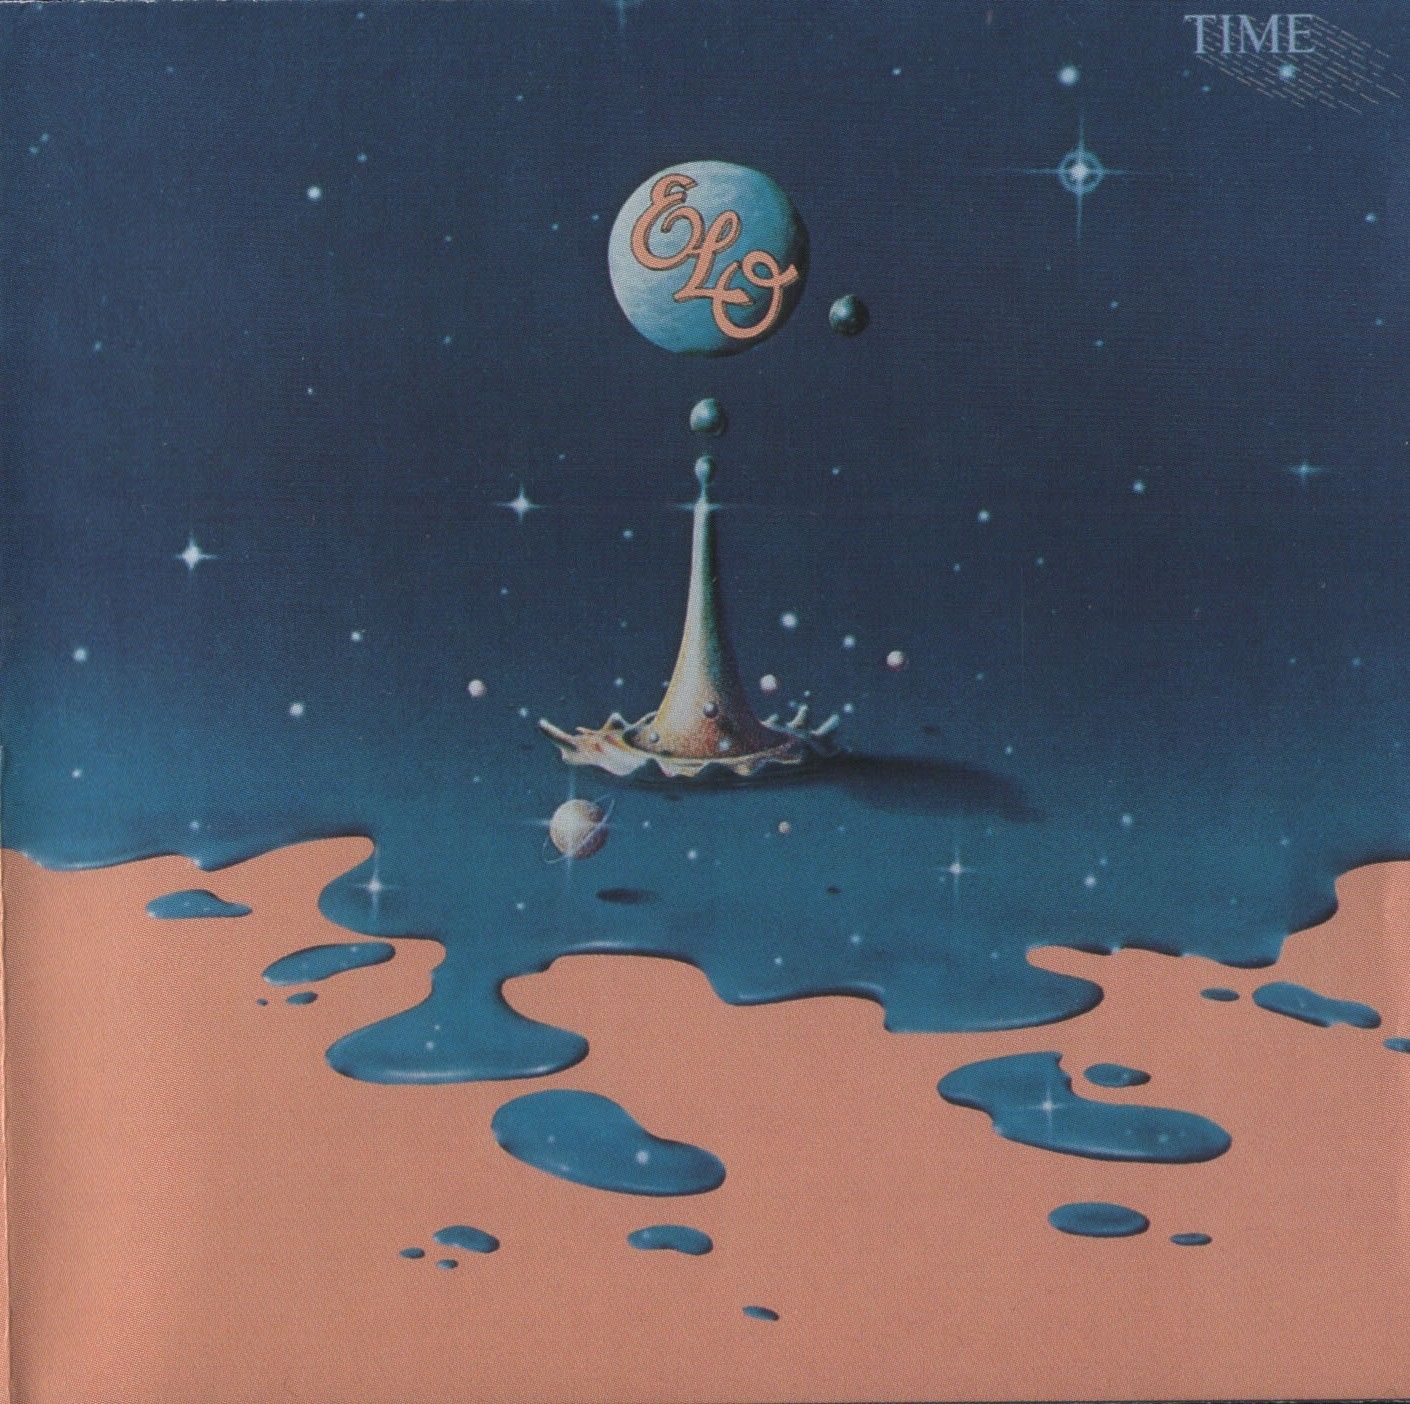 ELECTRIC LIGHT ORCHESTRA WALLPAPERS FREE Wallpapers Background